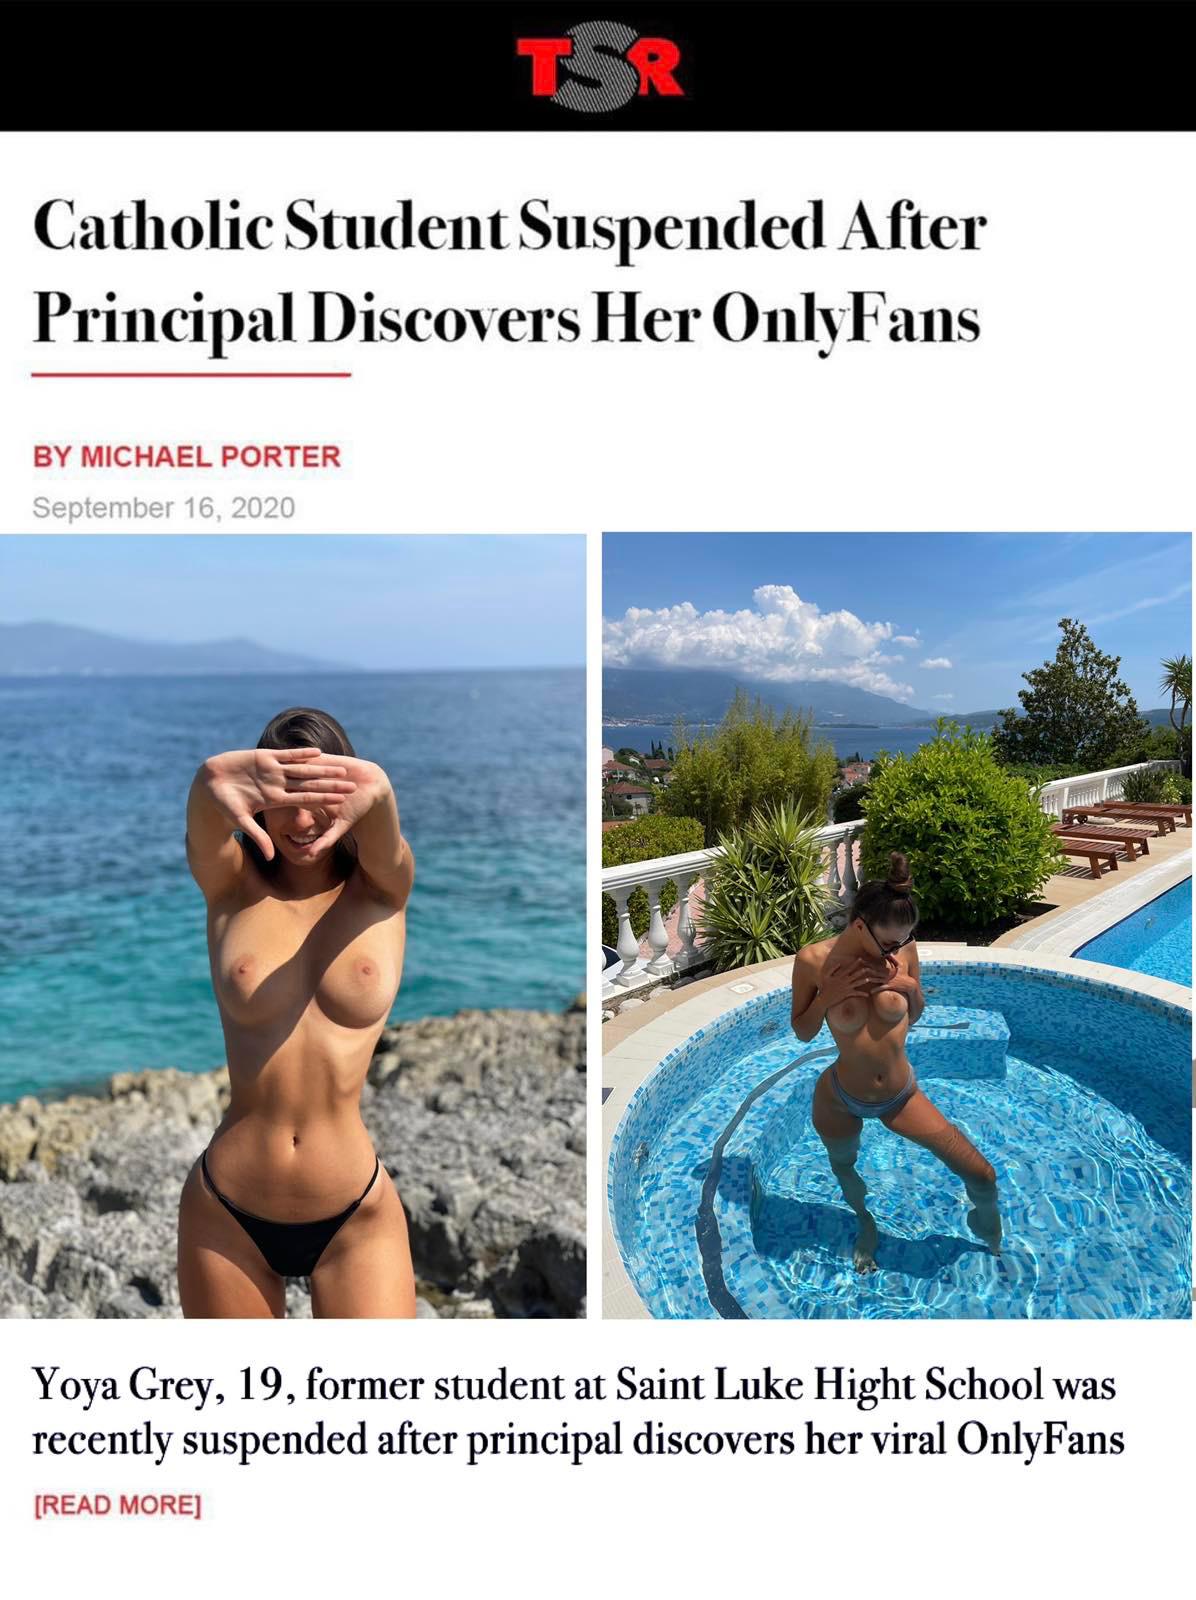 Catholic student suspended after onlyfans